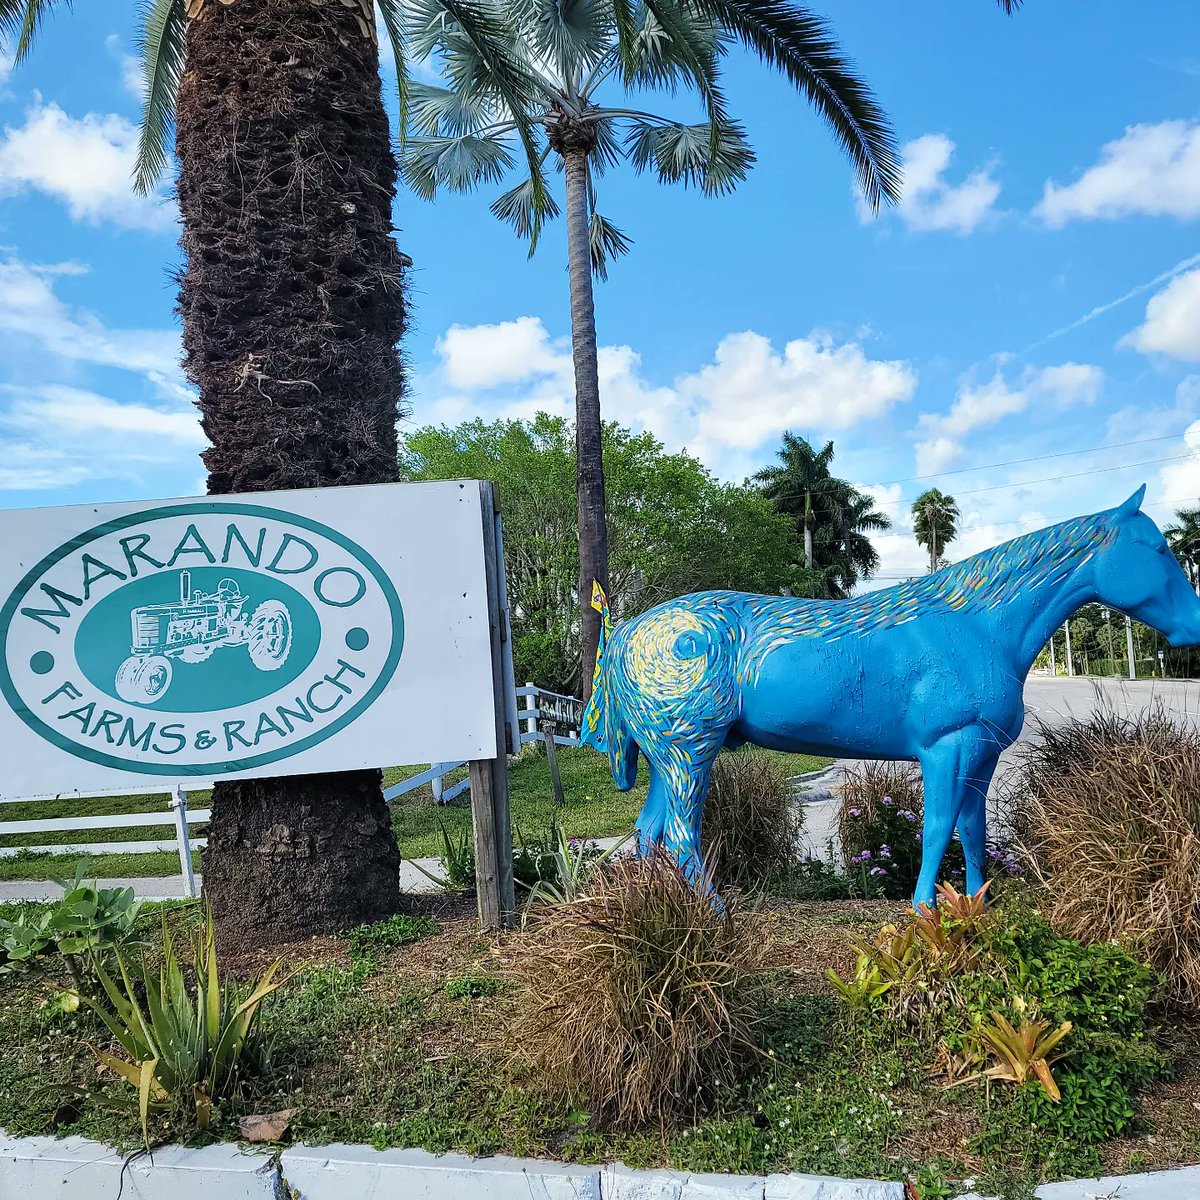 My 1st time at #MarandoFarmsandRanchRanch in #DavieFL. 🚜👨‍🌾👩‍🌾 They have a #garden, #food market, #pettingzoo & horseback riding 🐎🌱🪴

They also have #ZENBAR with a variety of #smoothies like #PurpleRain (#Blueberries, #Banana, #Cacao, #PeanutButter, & #AlmondMilk) 💜🌧🫐🍌🍫🥜